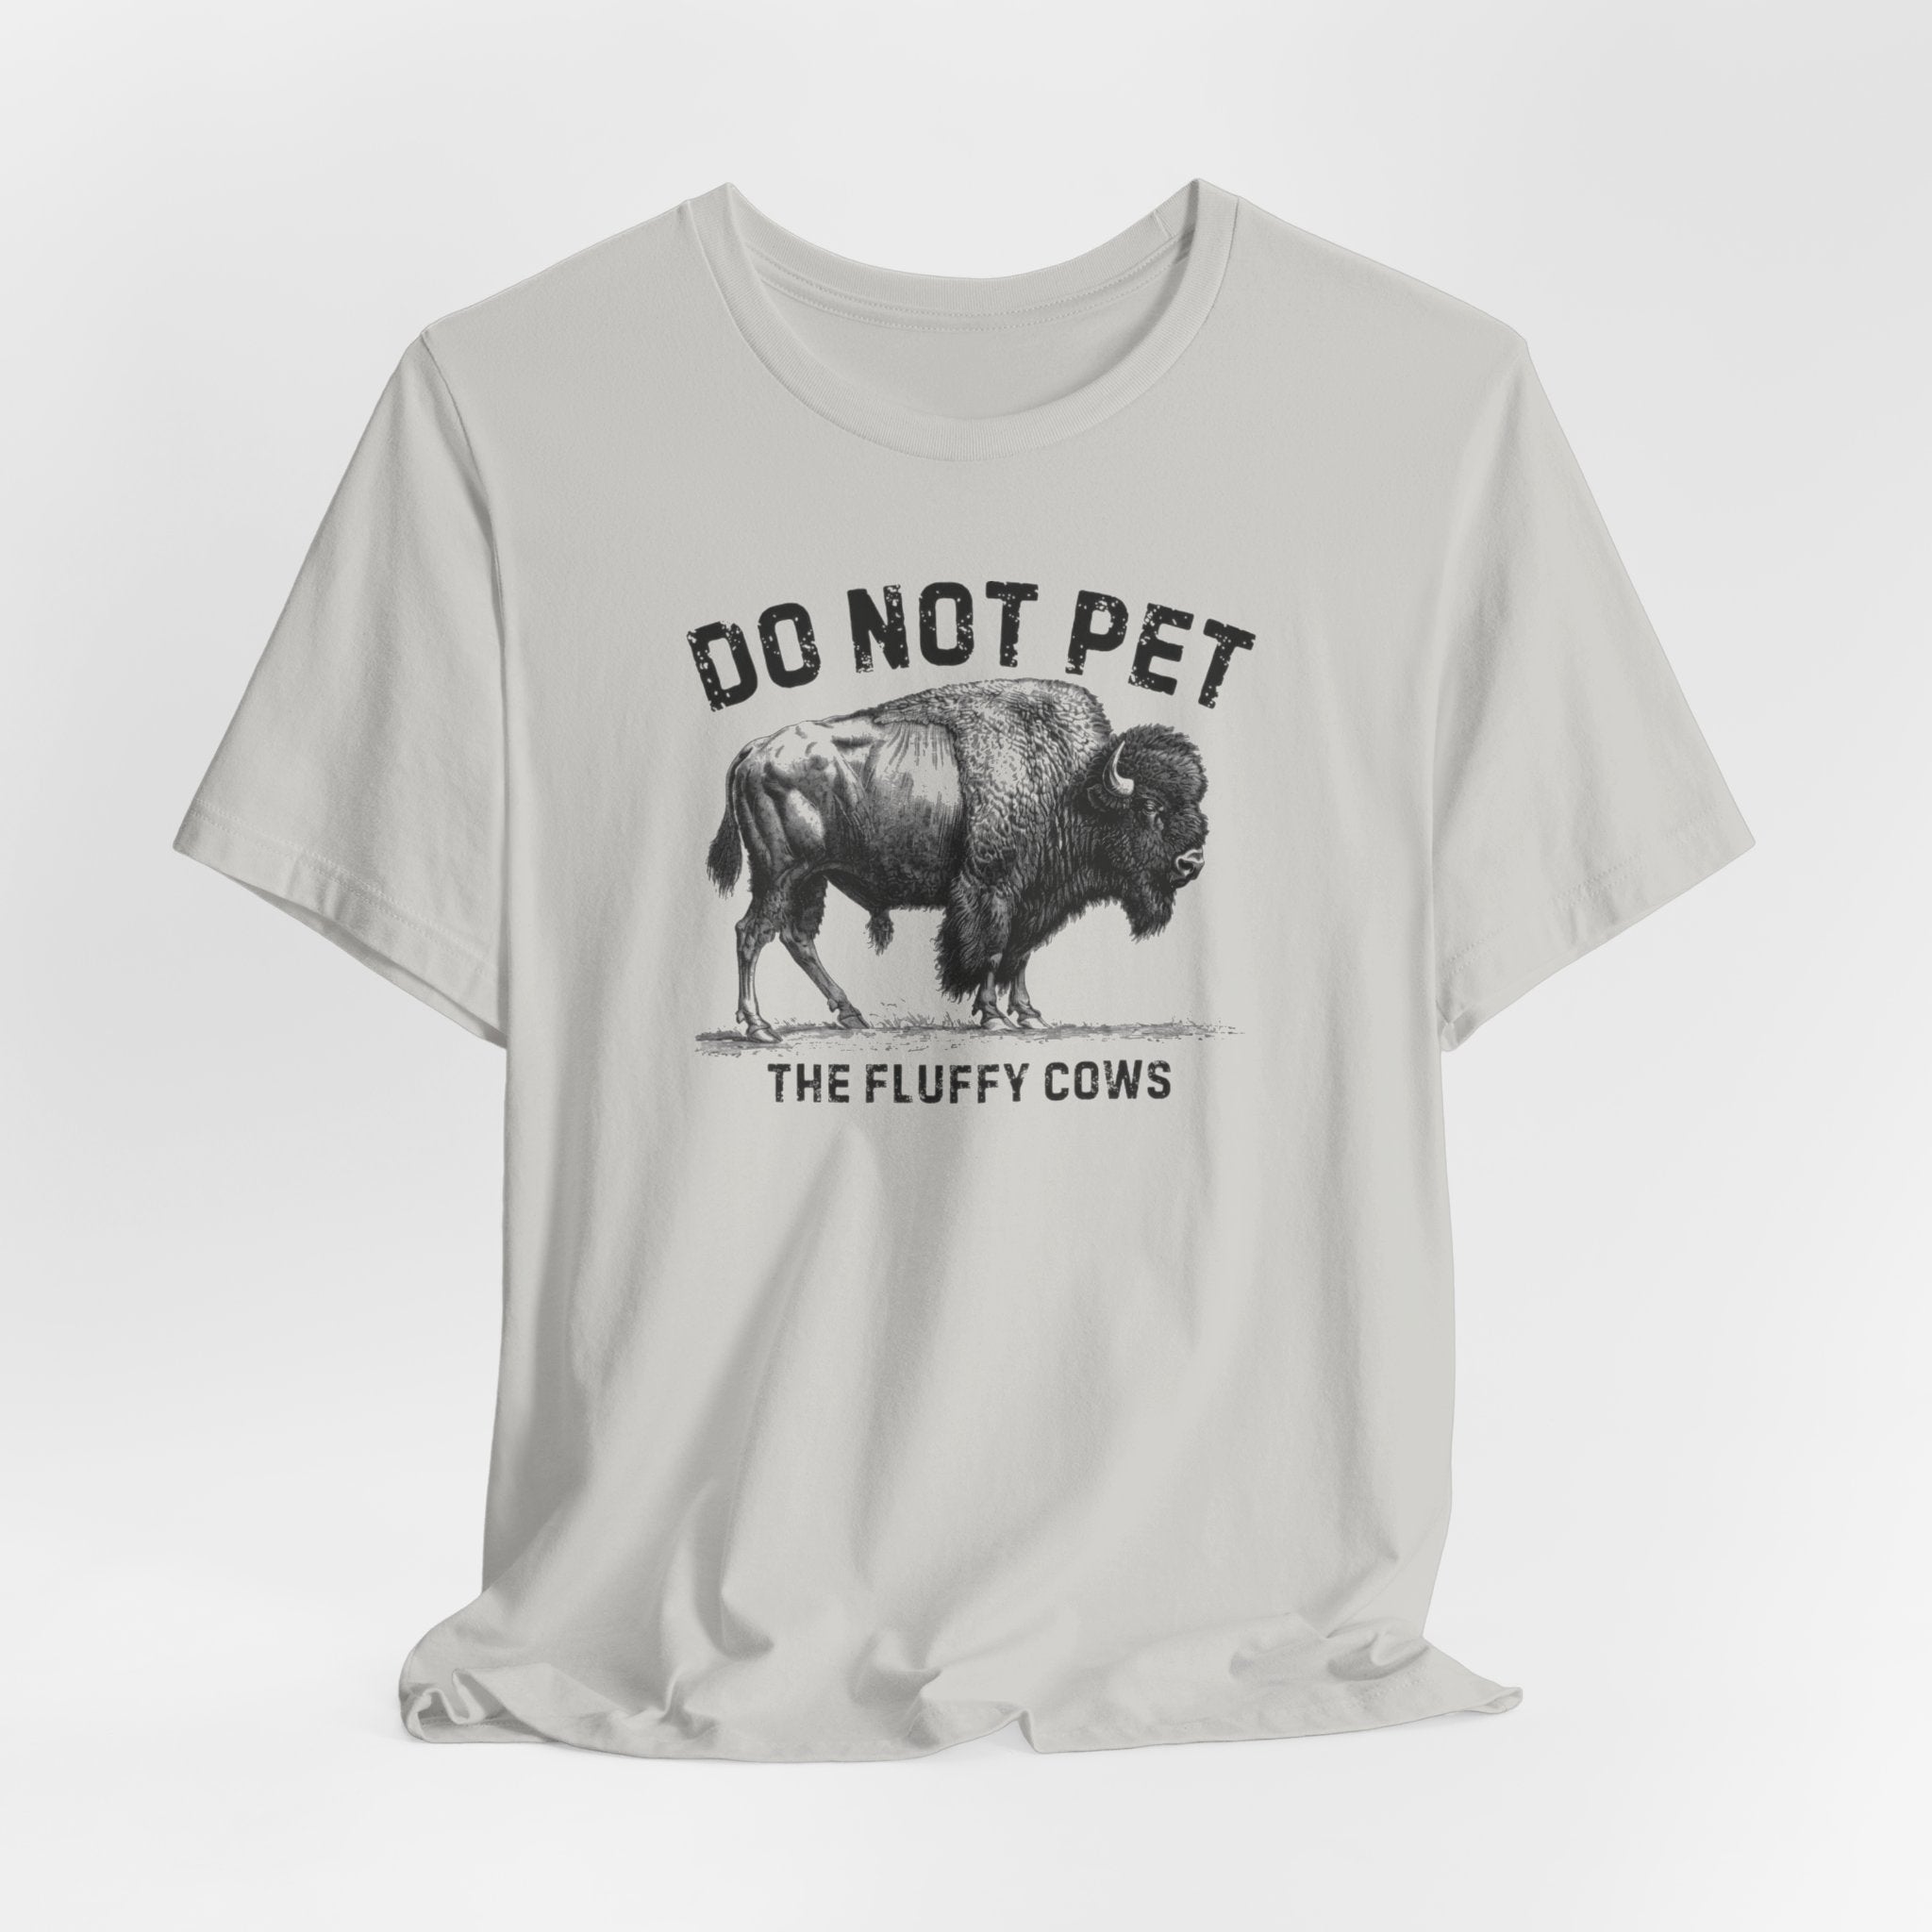 Do Not Pet The Fluffy Cows Shirt Funny Animal Lover Tee